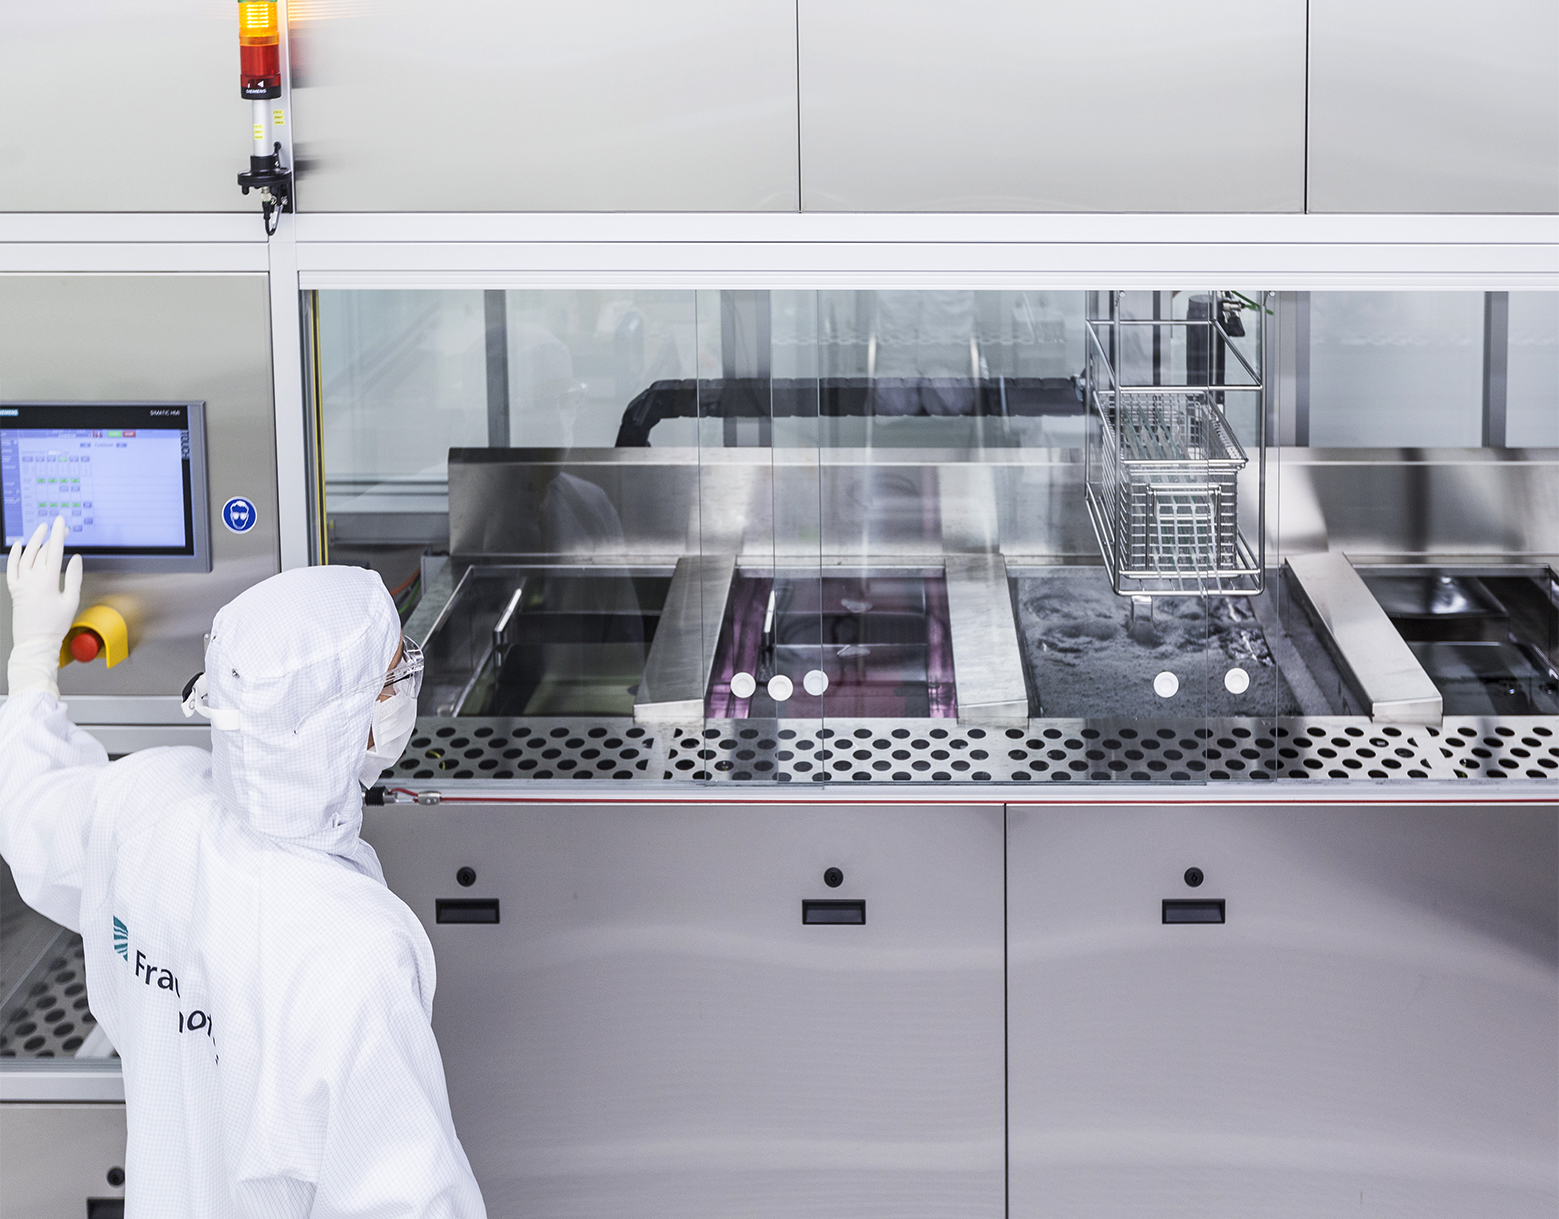 Fraunhofer IPA is the only institution in Germany to offer the entire process chain, from the cleaning itself through cleanliness analysis all the way to transportation in an ultra-clean environment. 